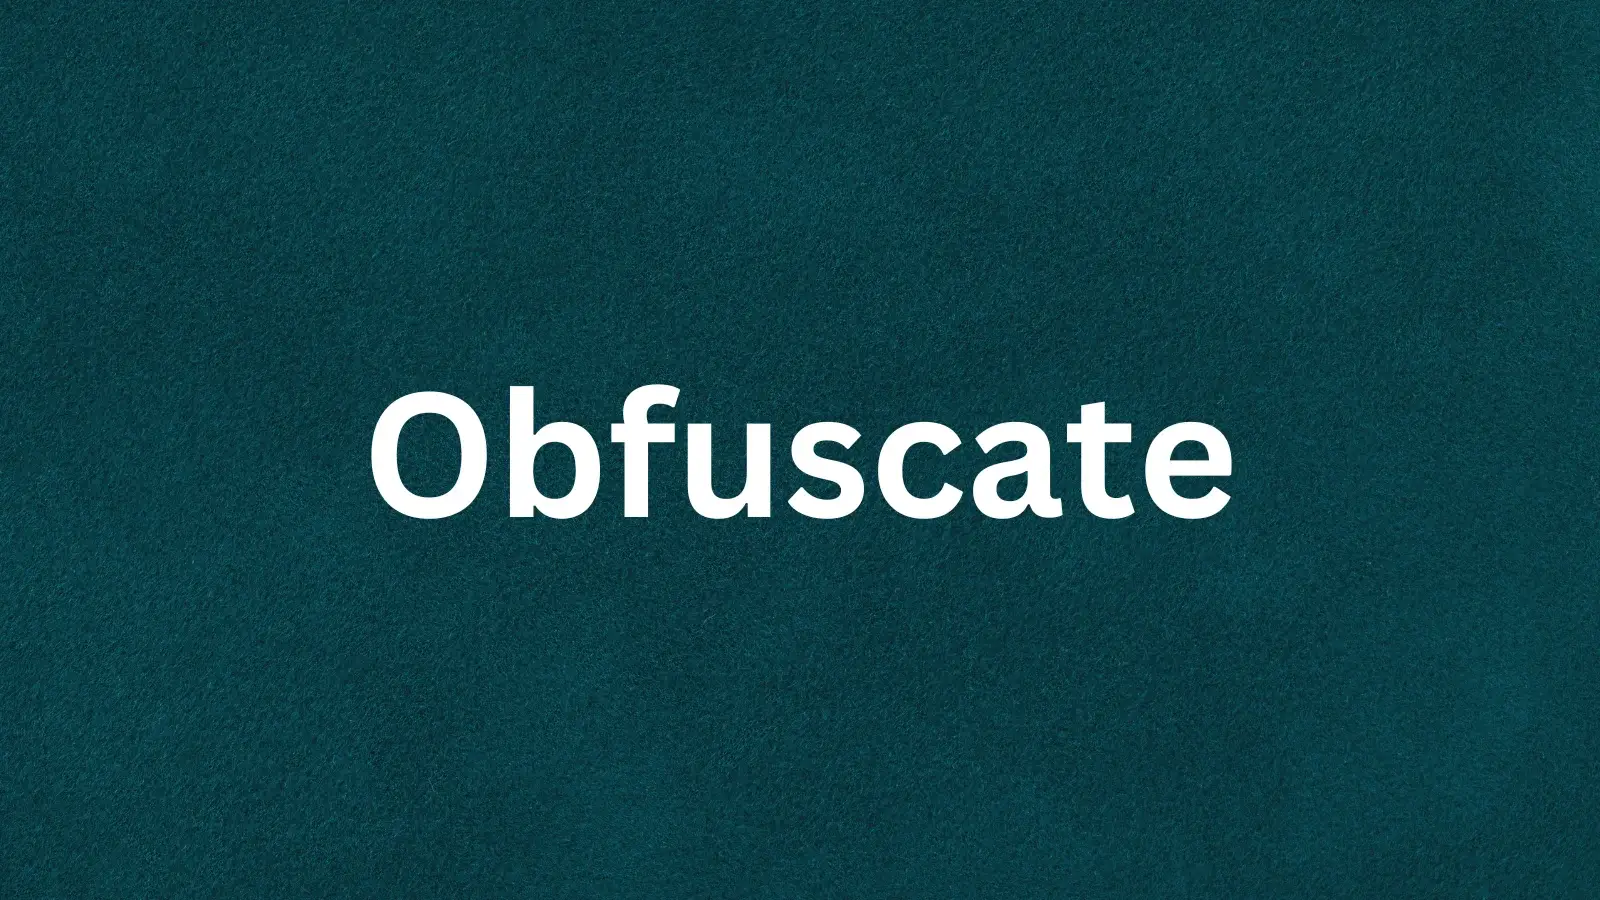 The word obfuscate and its meaning